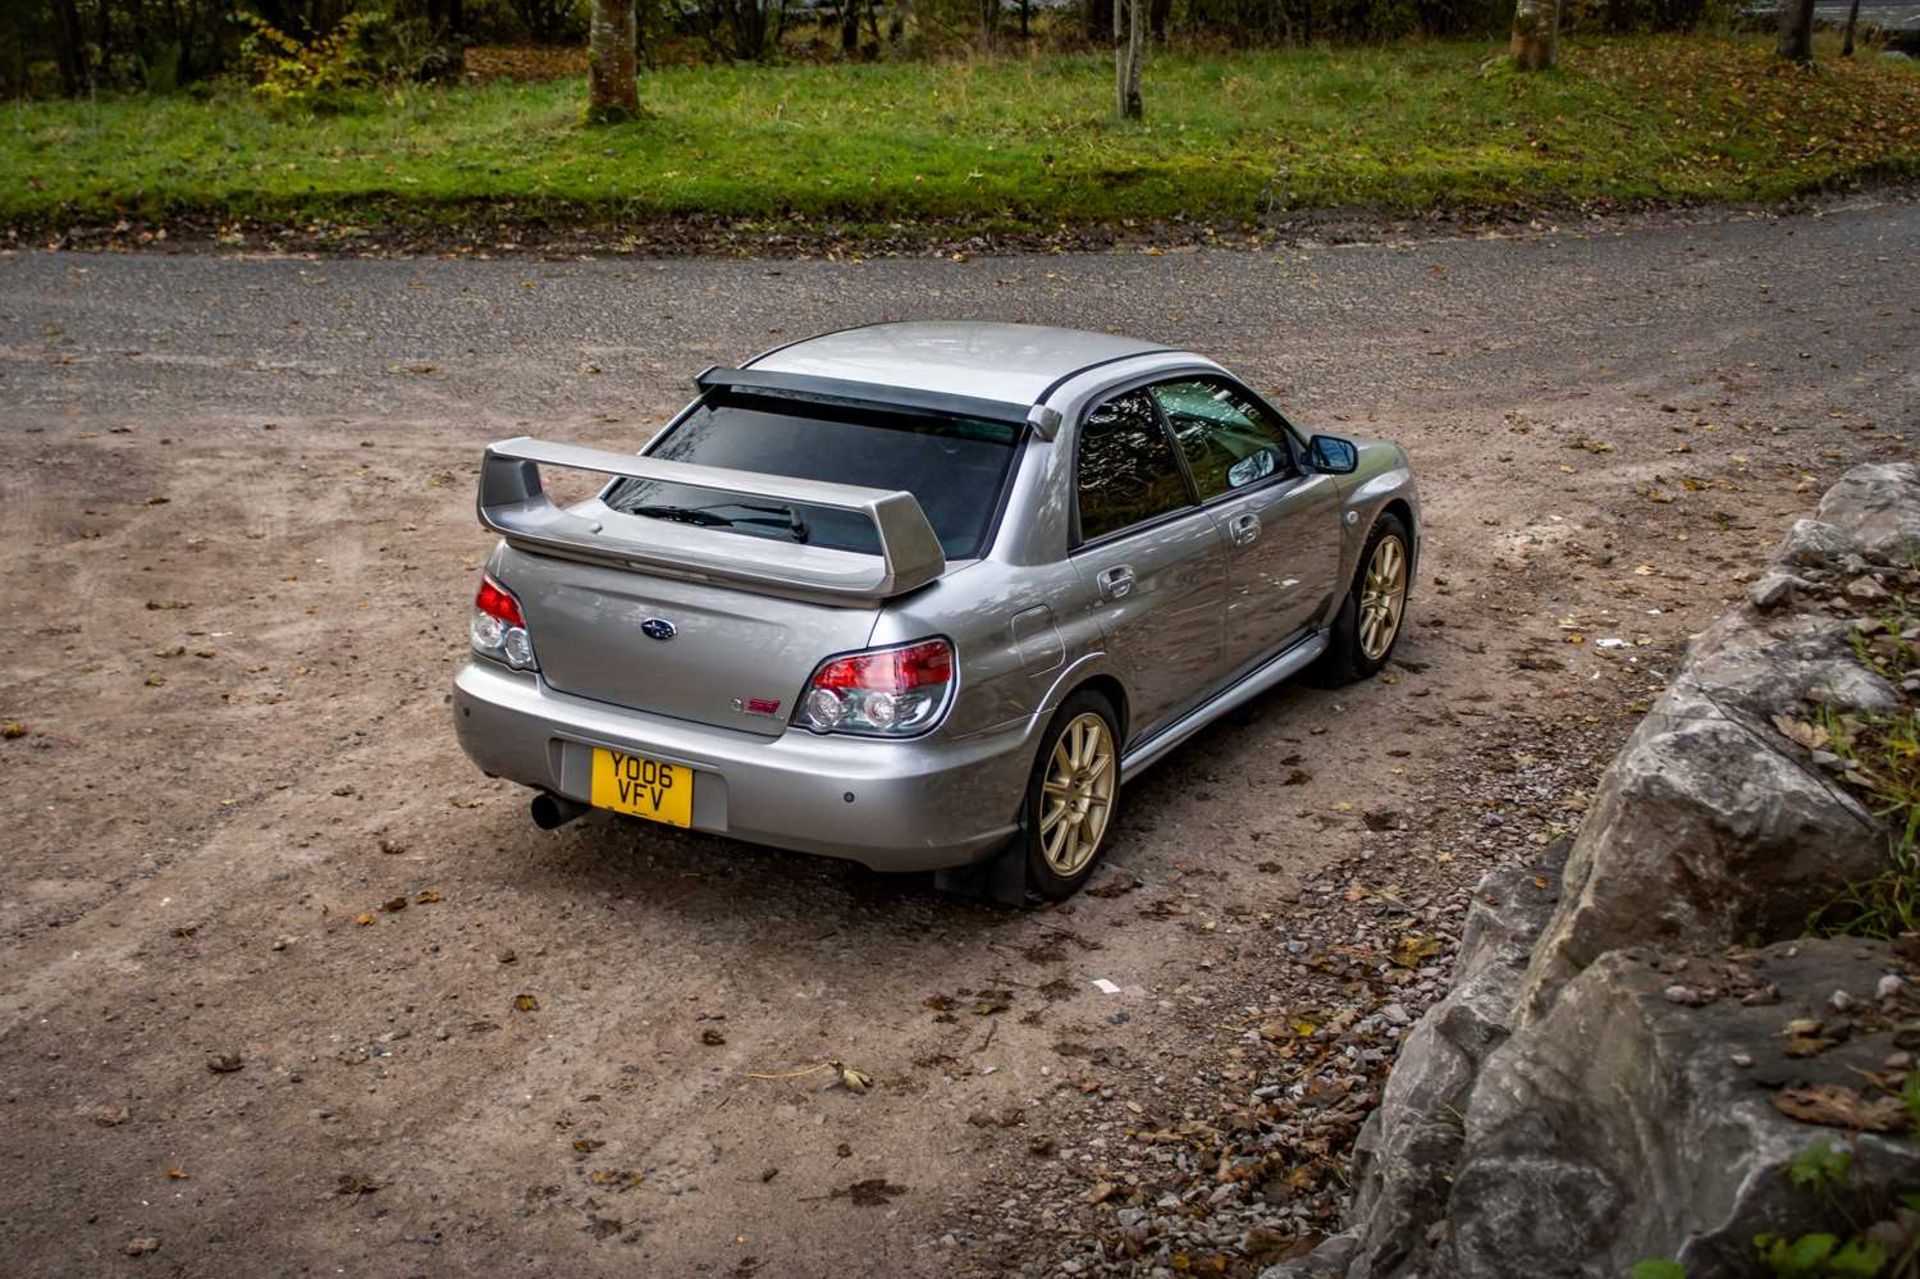 2006 Subaru Impreza WRX STi Featuring a plethora of desirable upgrades, supported by a dyno printout - Image 18 of 103